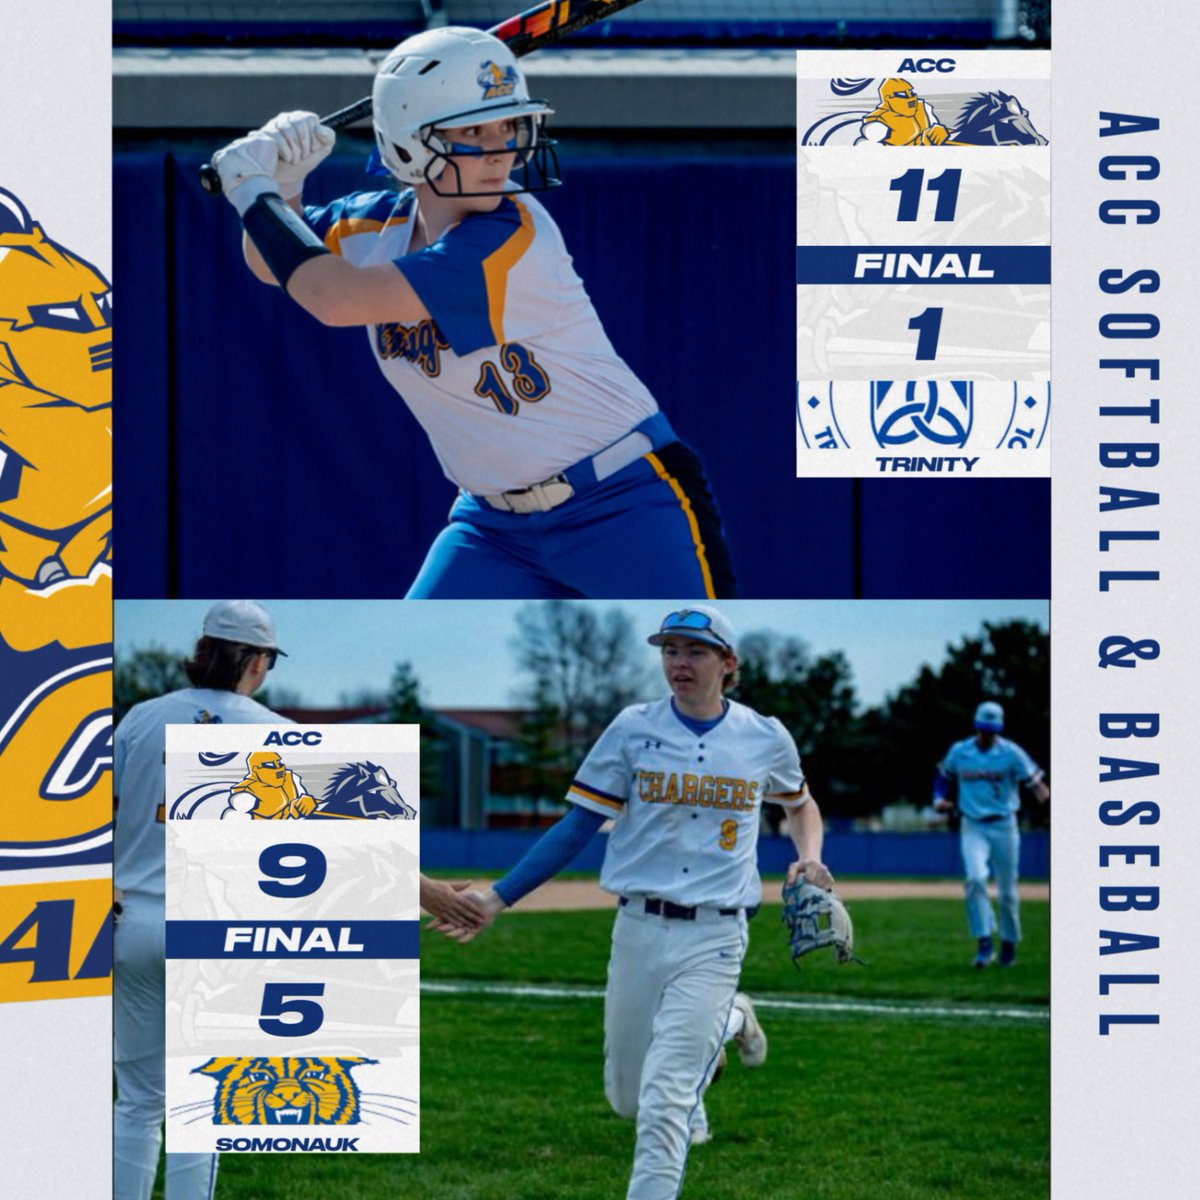 Big wins for softball over Trinity High School and baseball over Somonauk today on the last full day of school heading into Easter break. Great work everyone! Go Chargers! #ChargerUp @ACCBaseball_ @ACC_Fastpitch